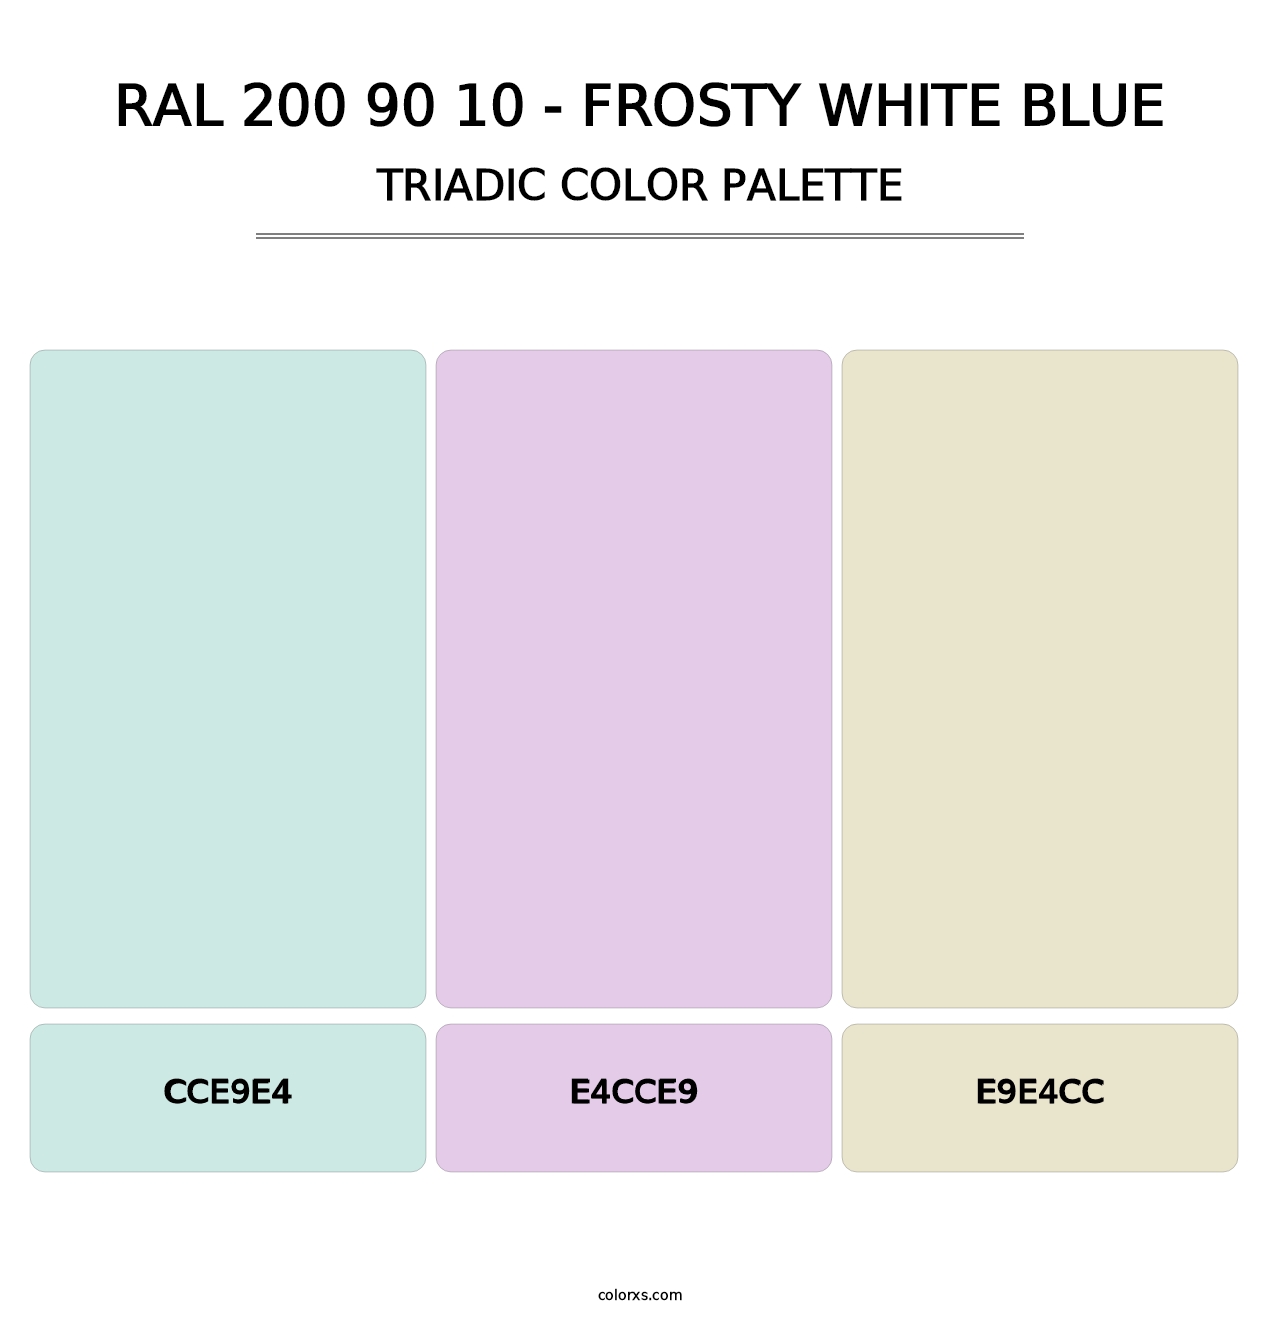 RAL 200 90 10 - Frosty White Blue - Triadic Color Palette